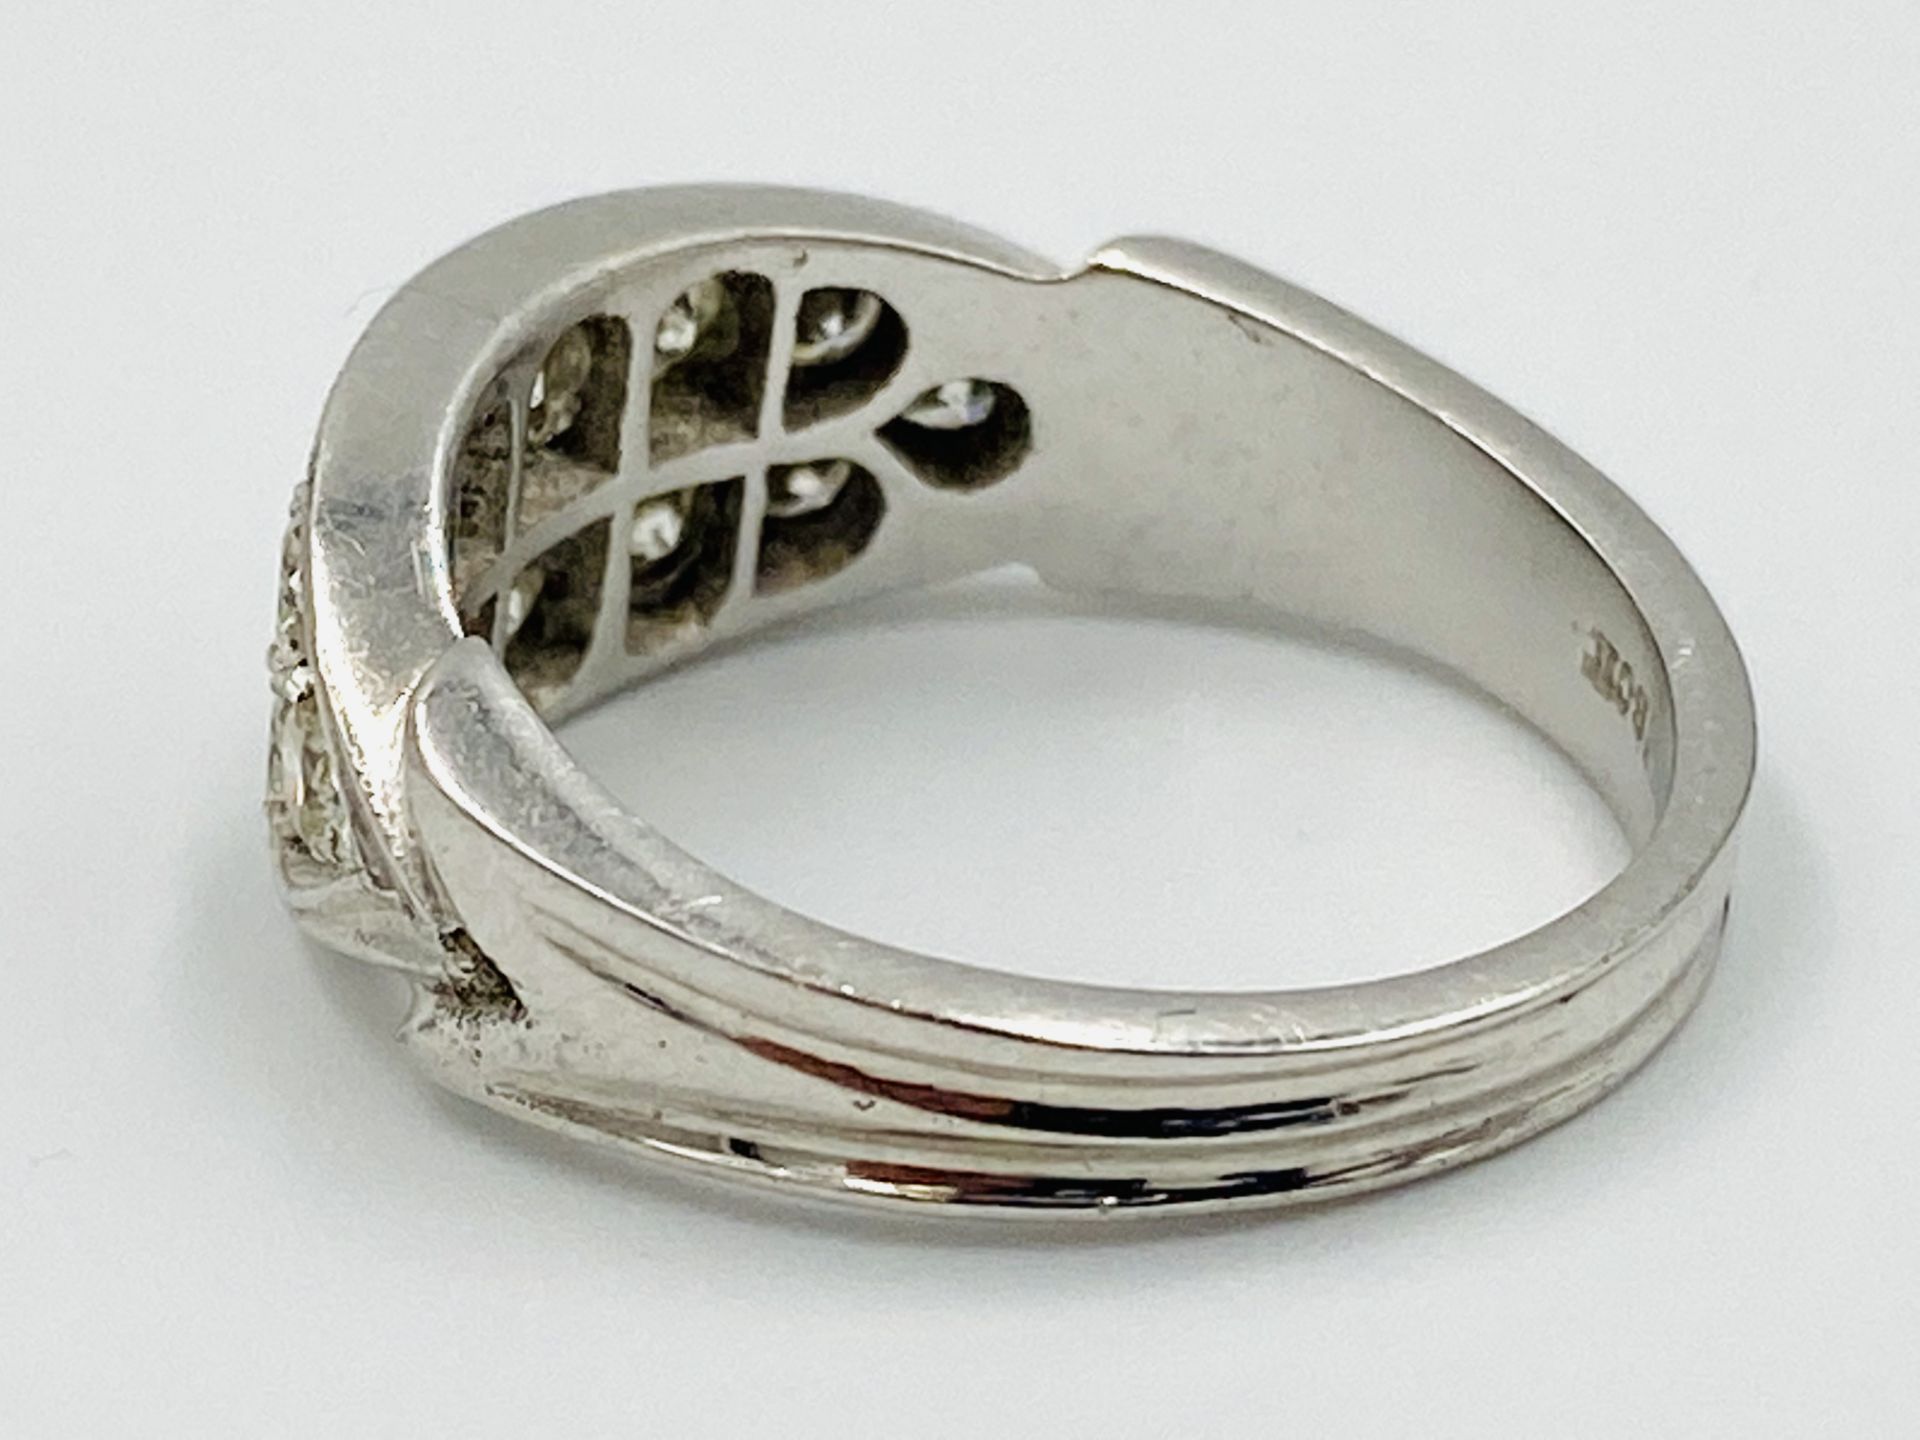 18ct white gold and diamond ring - Image 3 of 5